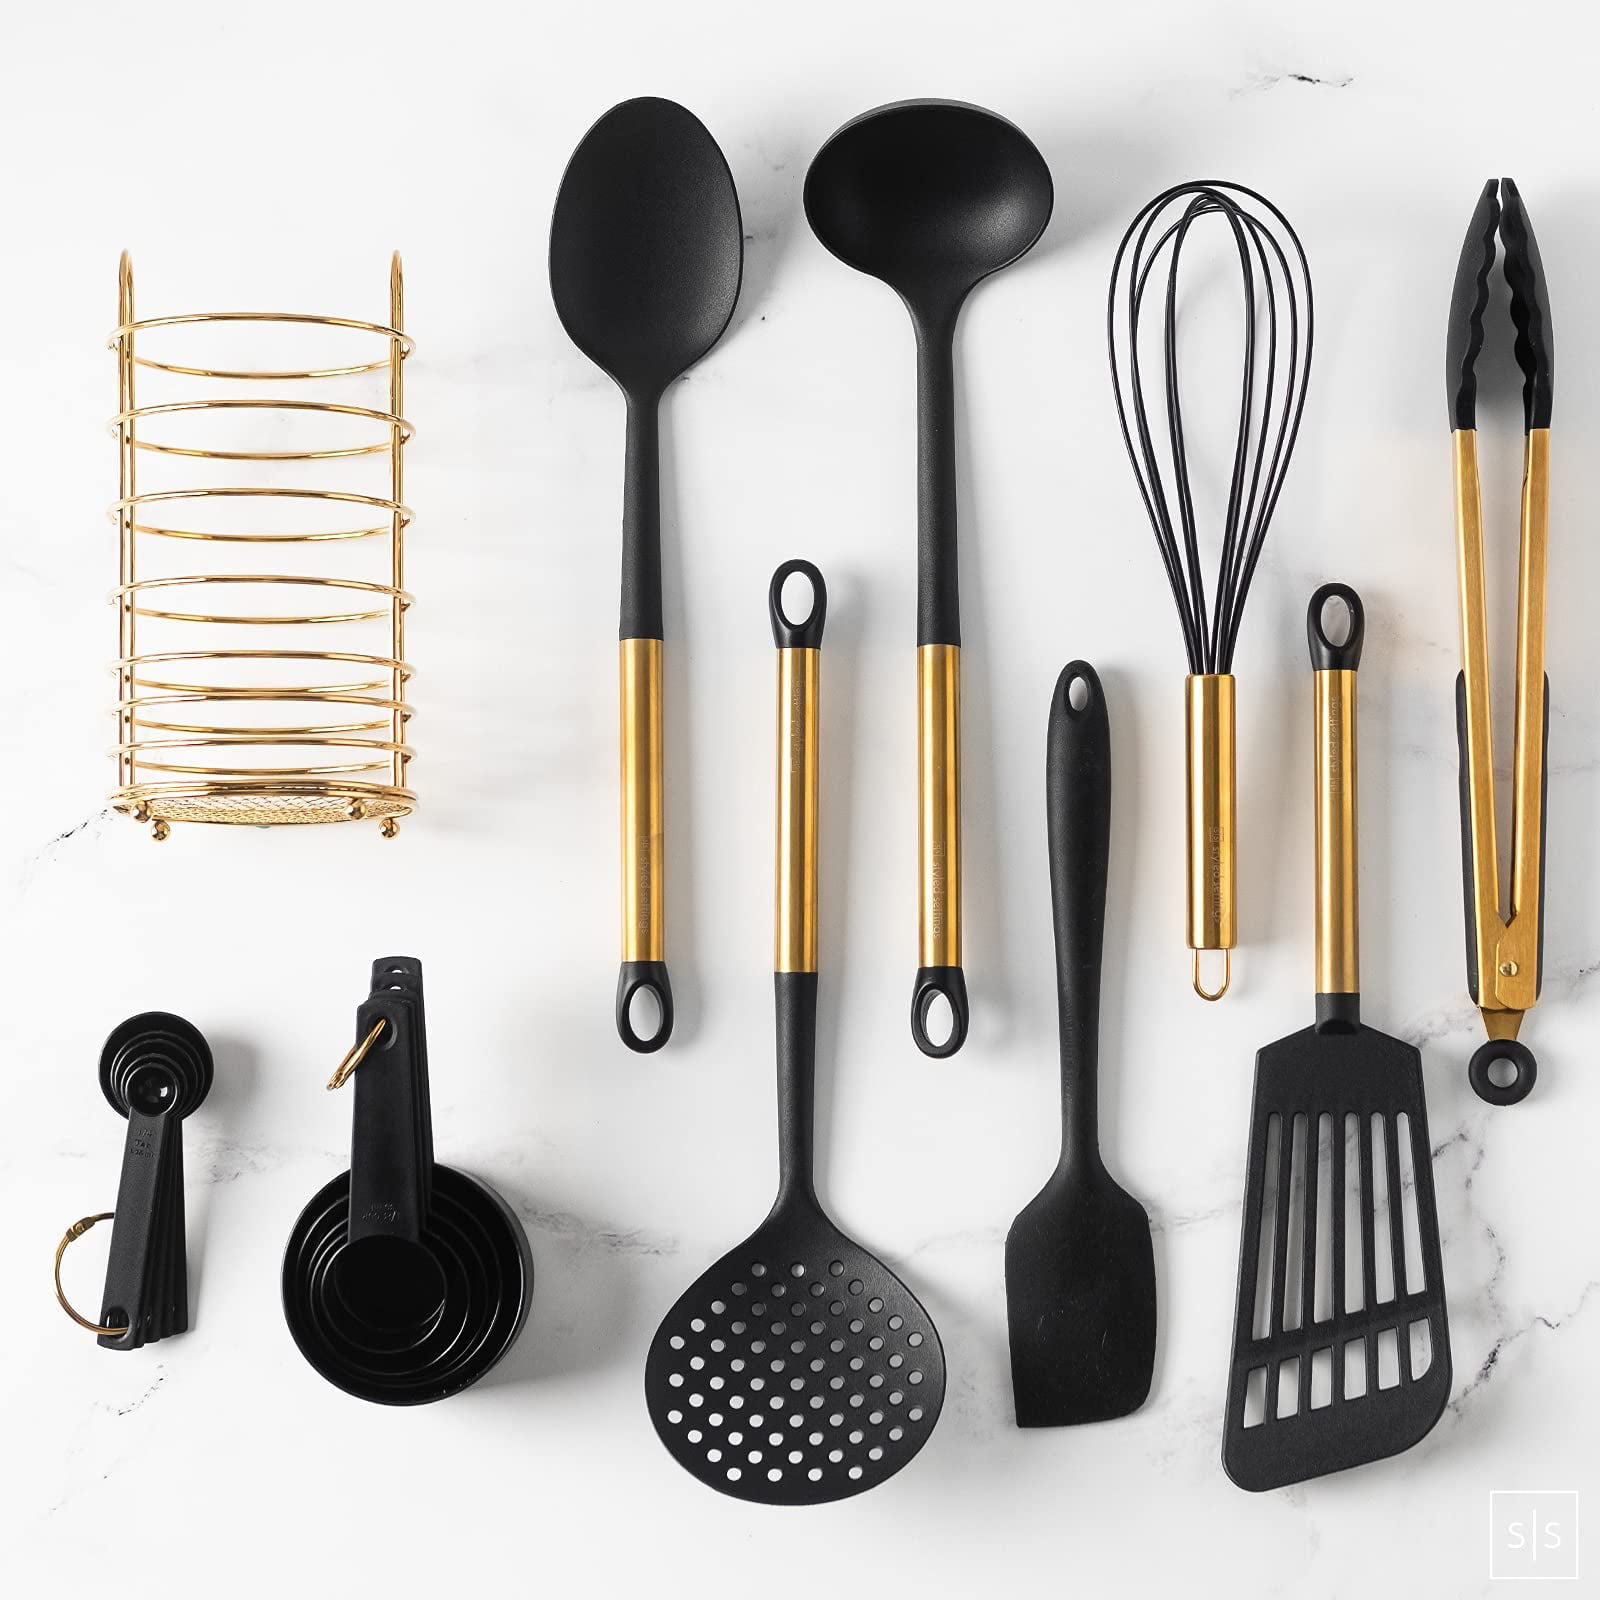 STYLED SETTINGS Black and Gold Utensil Holder with Built-in Spoon Rest - 2  PC Large Ceramic Utensil Holder Includes Black & Gold Spoon Rest - Kitchen